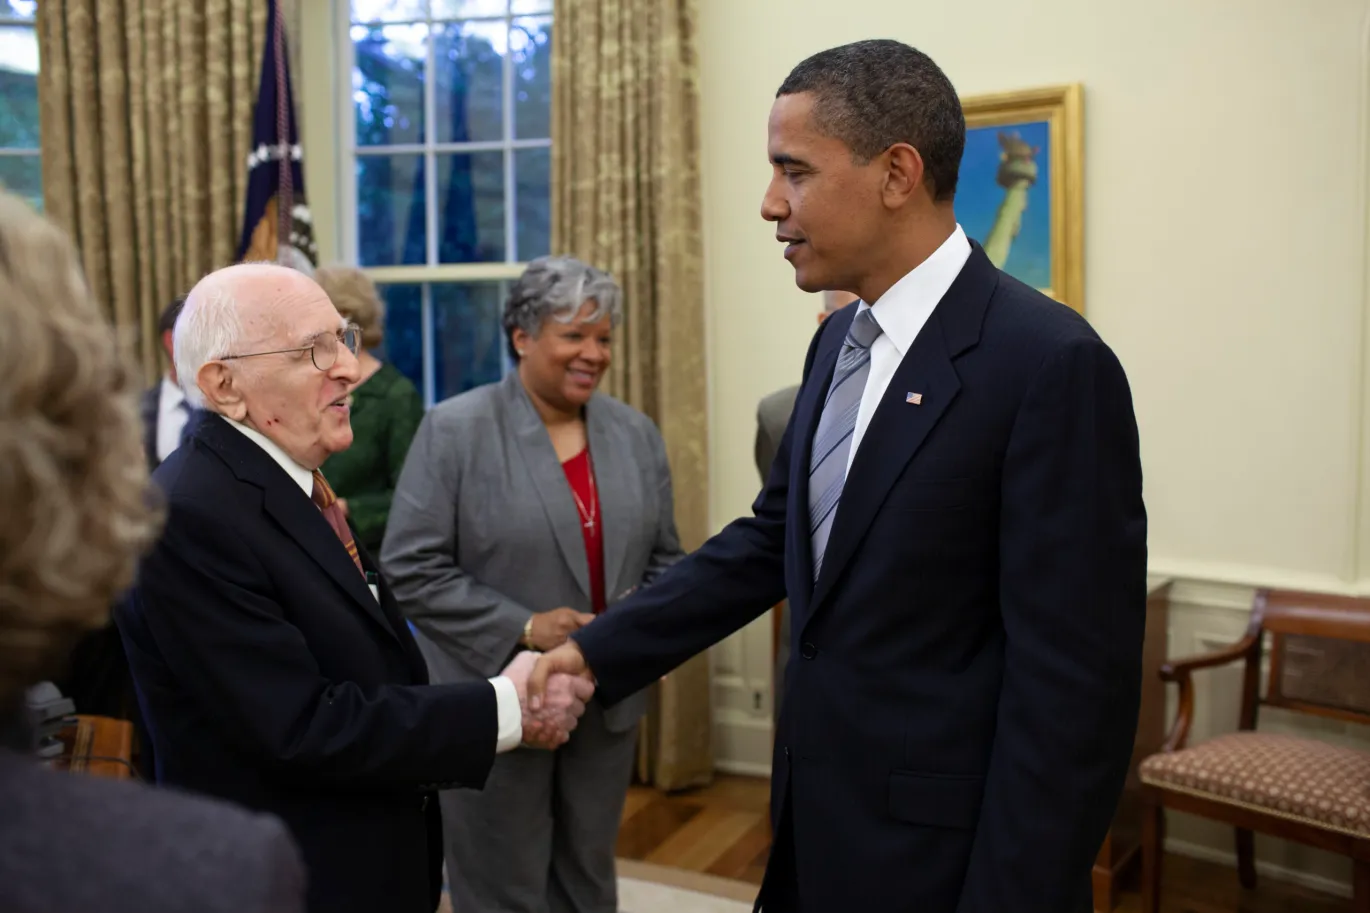 President Obama greets Kamaney in the Oval Office, 2009